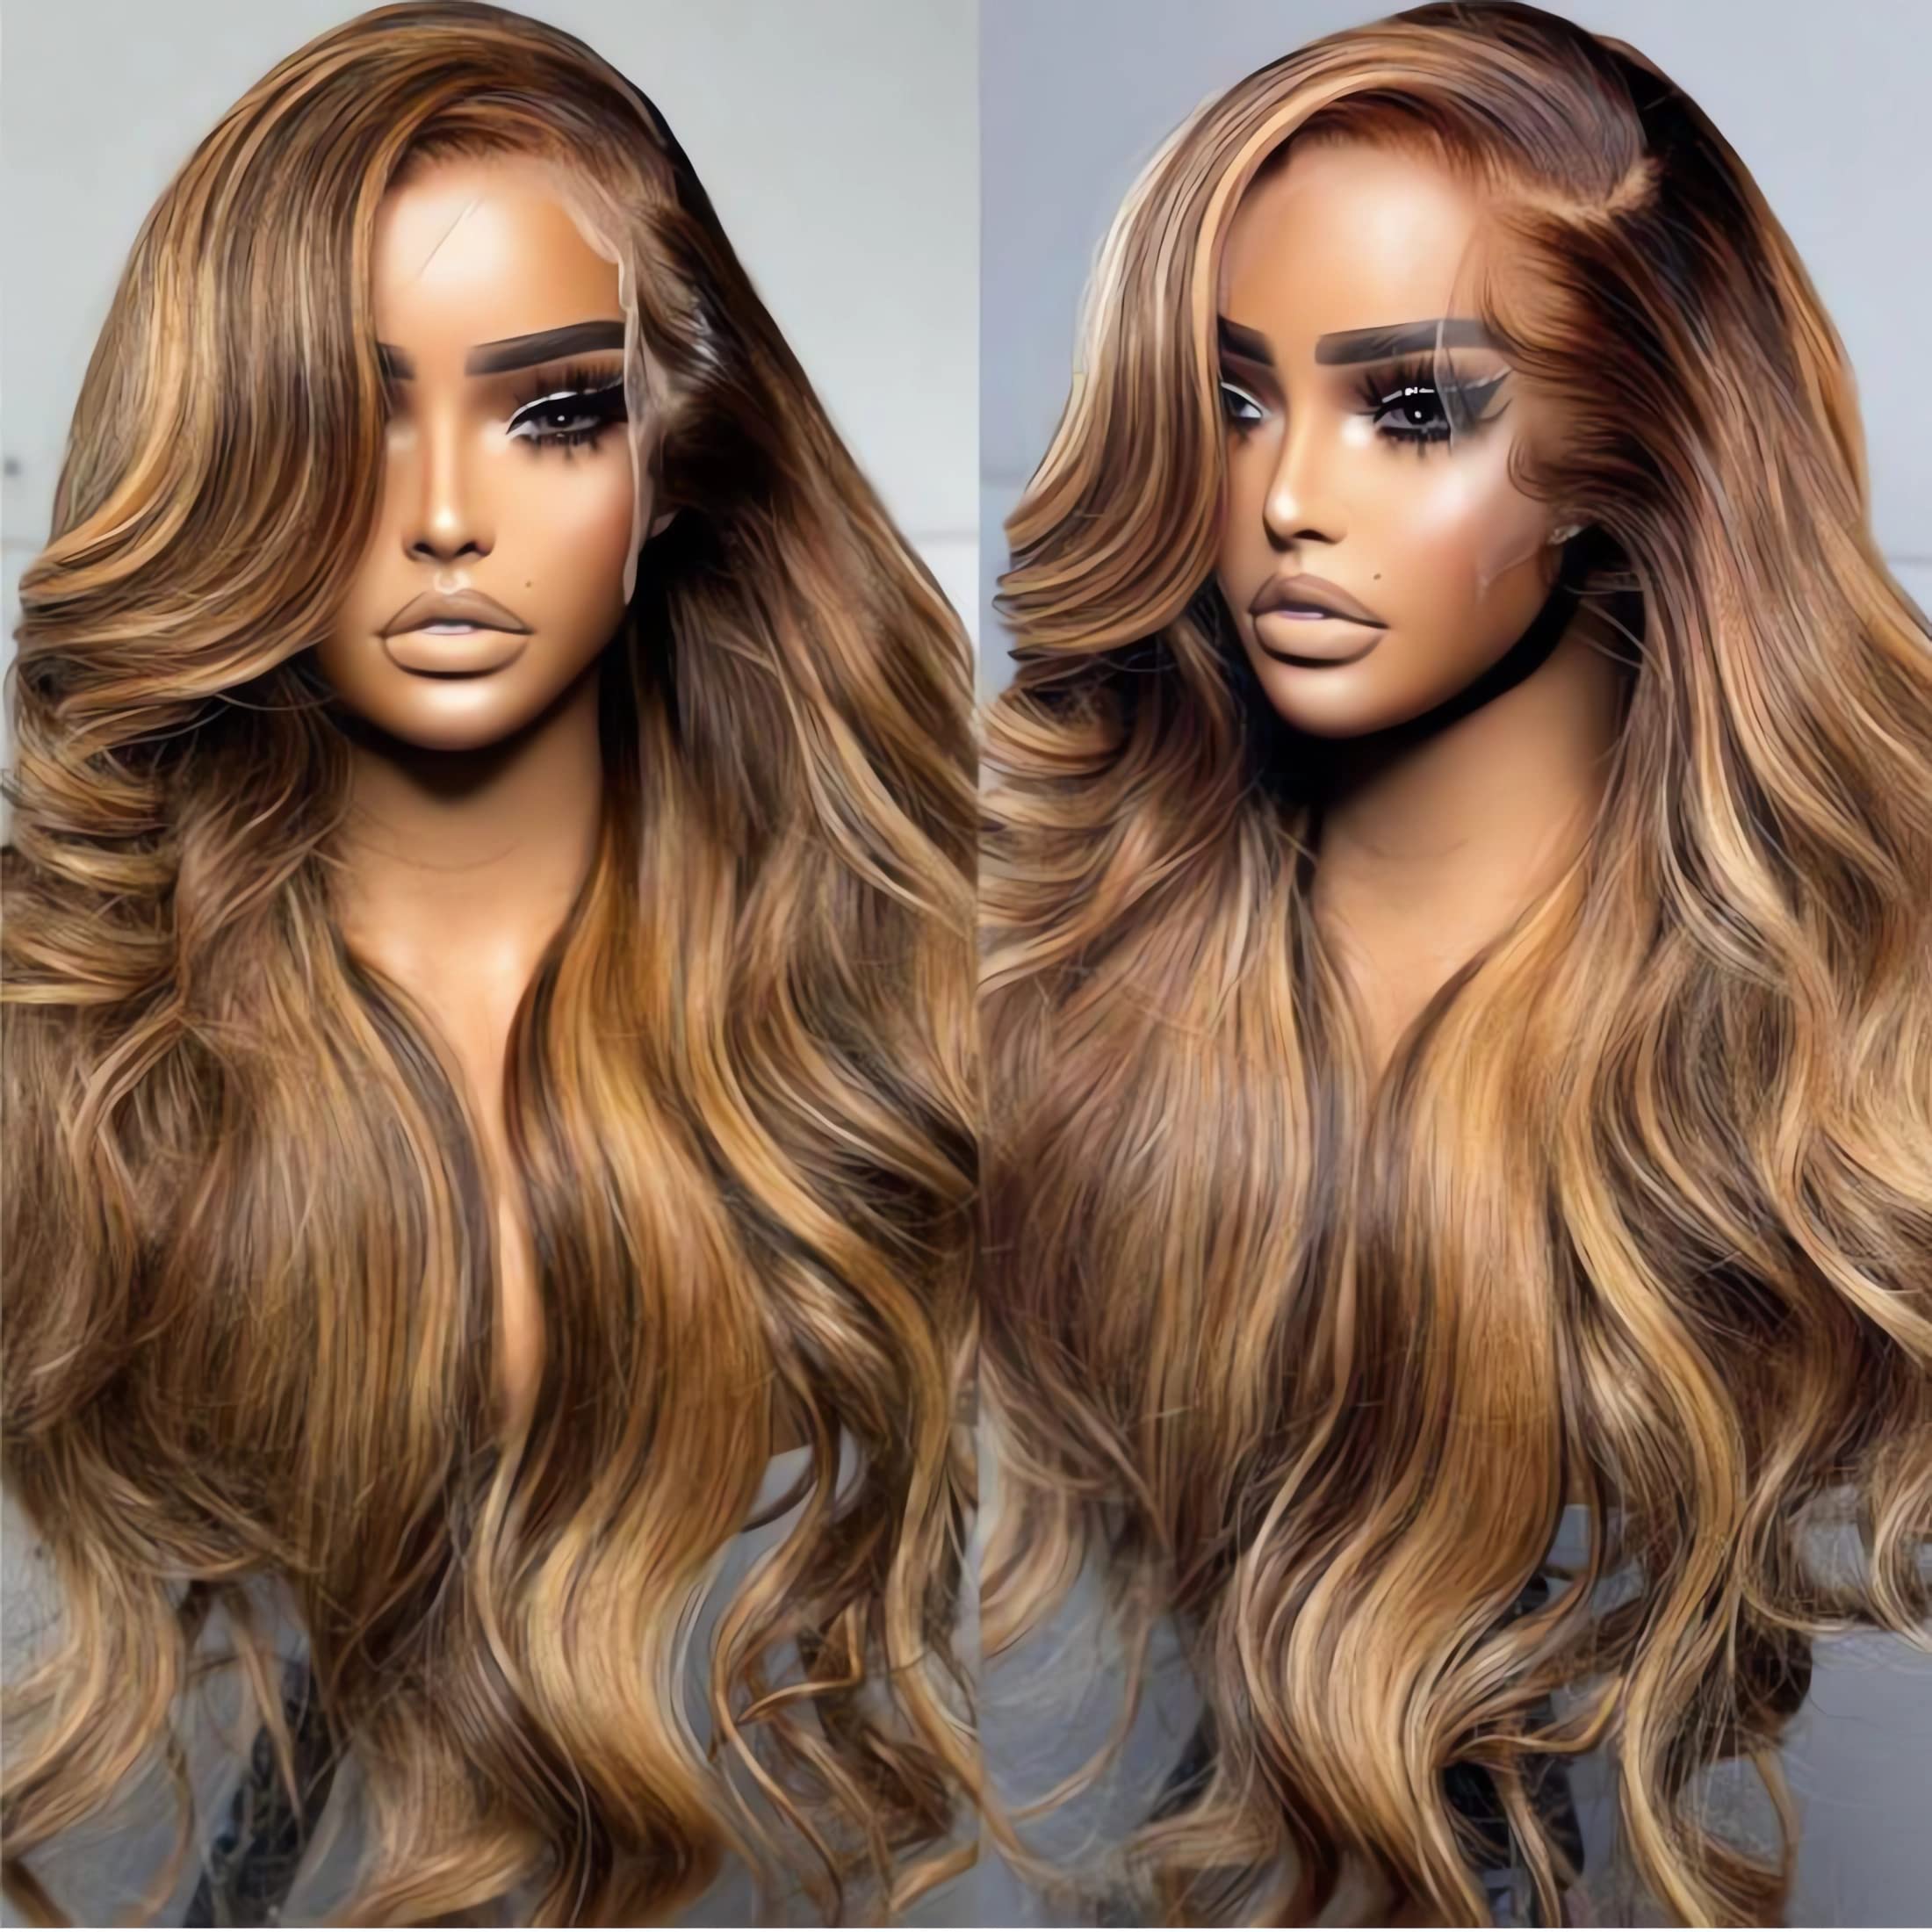 UNIcE 26Inch Ombre Highlight 13x4 Lace Front Human Hair Wig Body Wave Brown Blonde TL412 color, Brazilian Remy Hair Lace Frontal